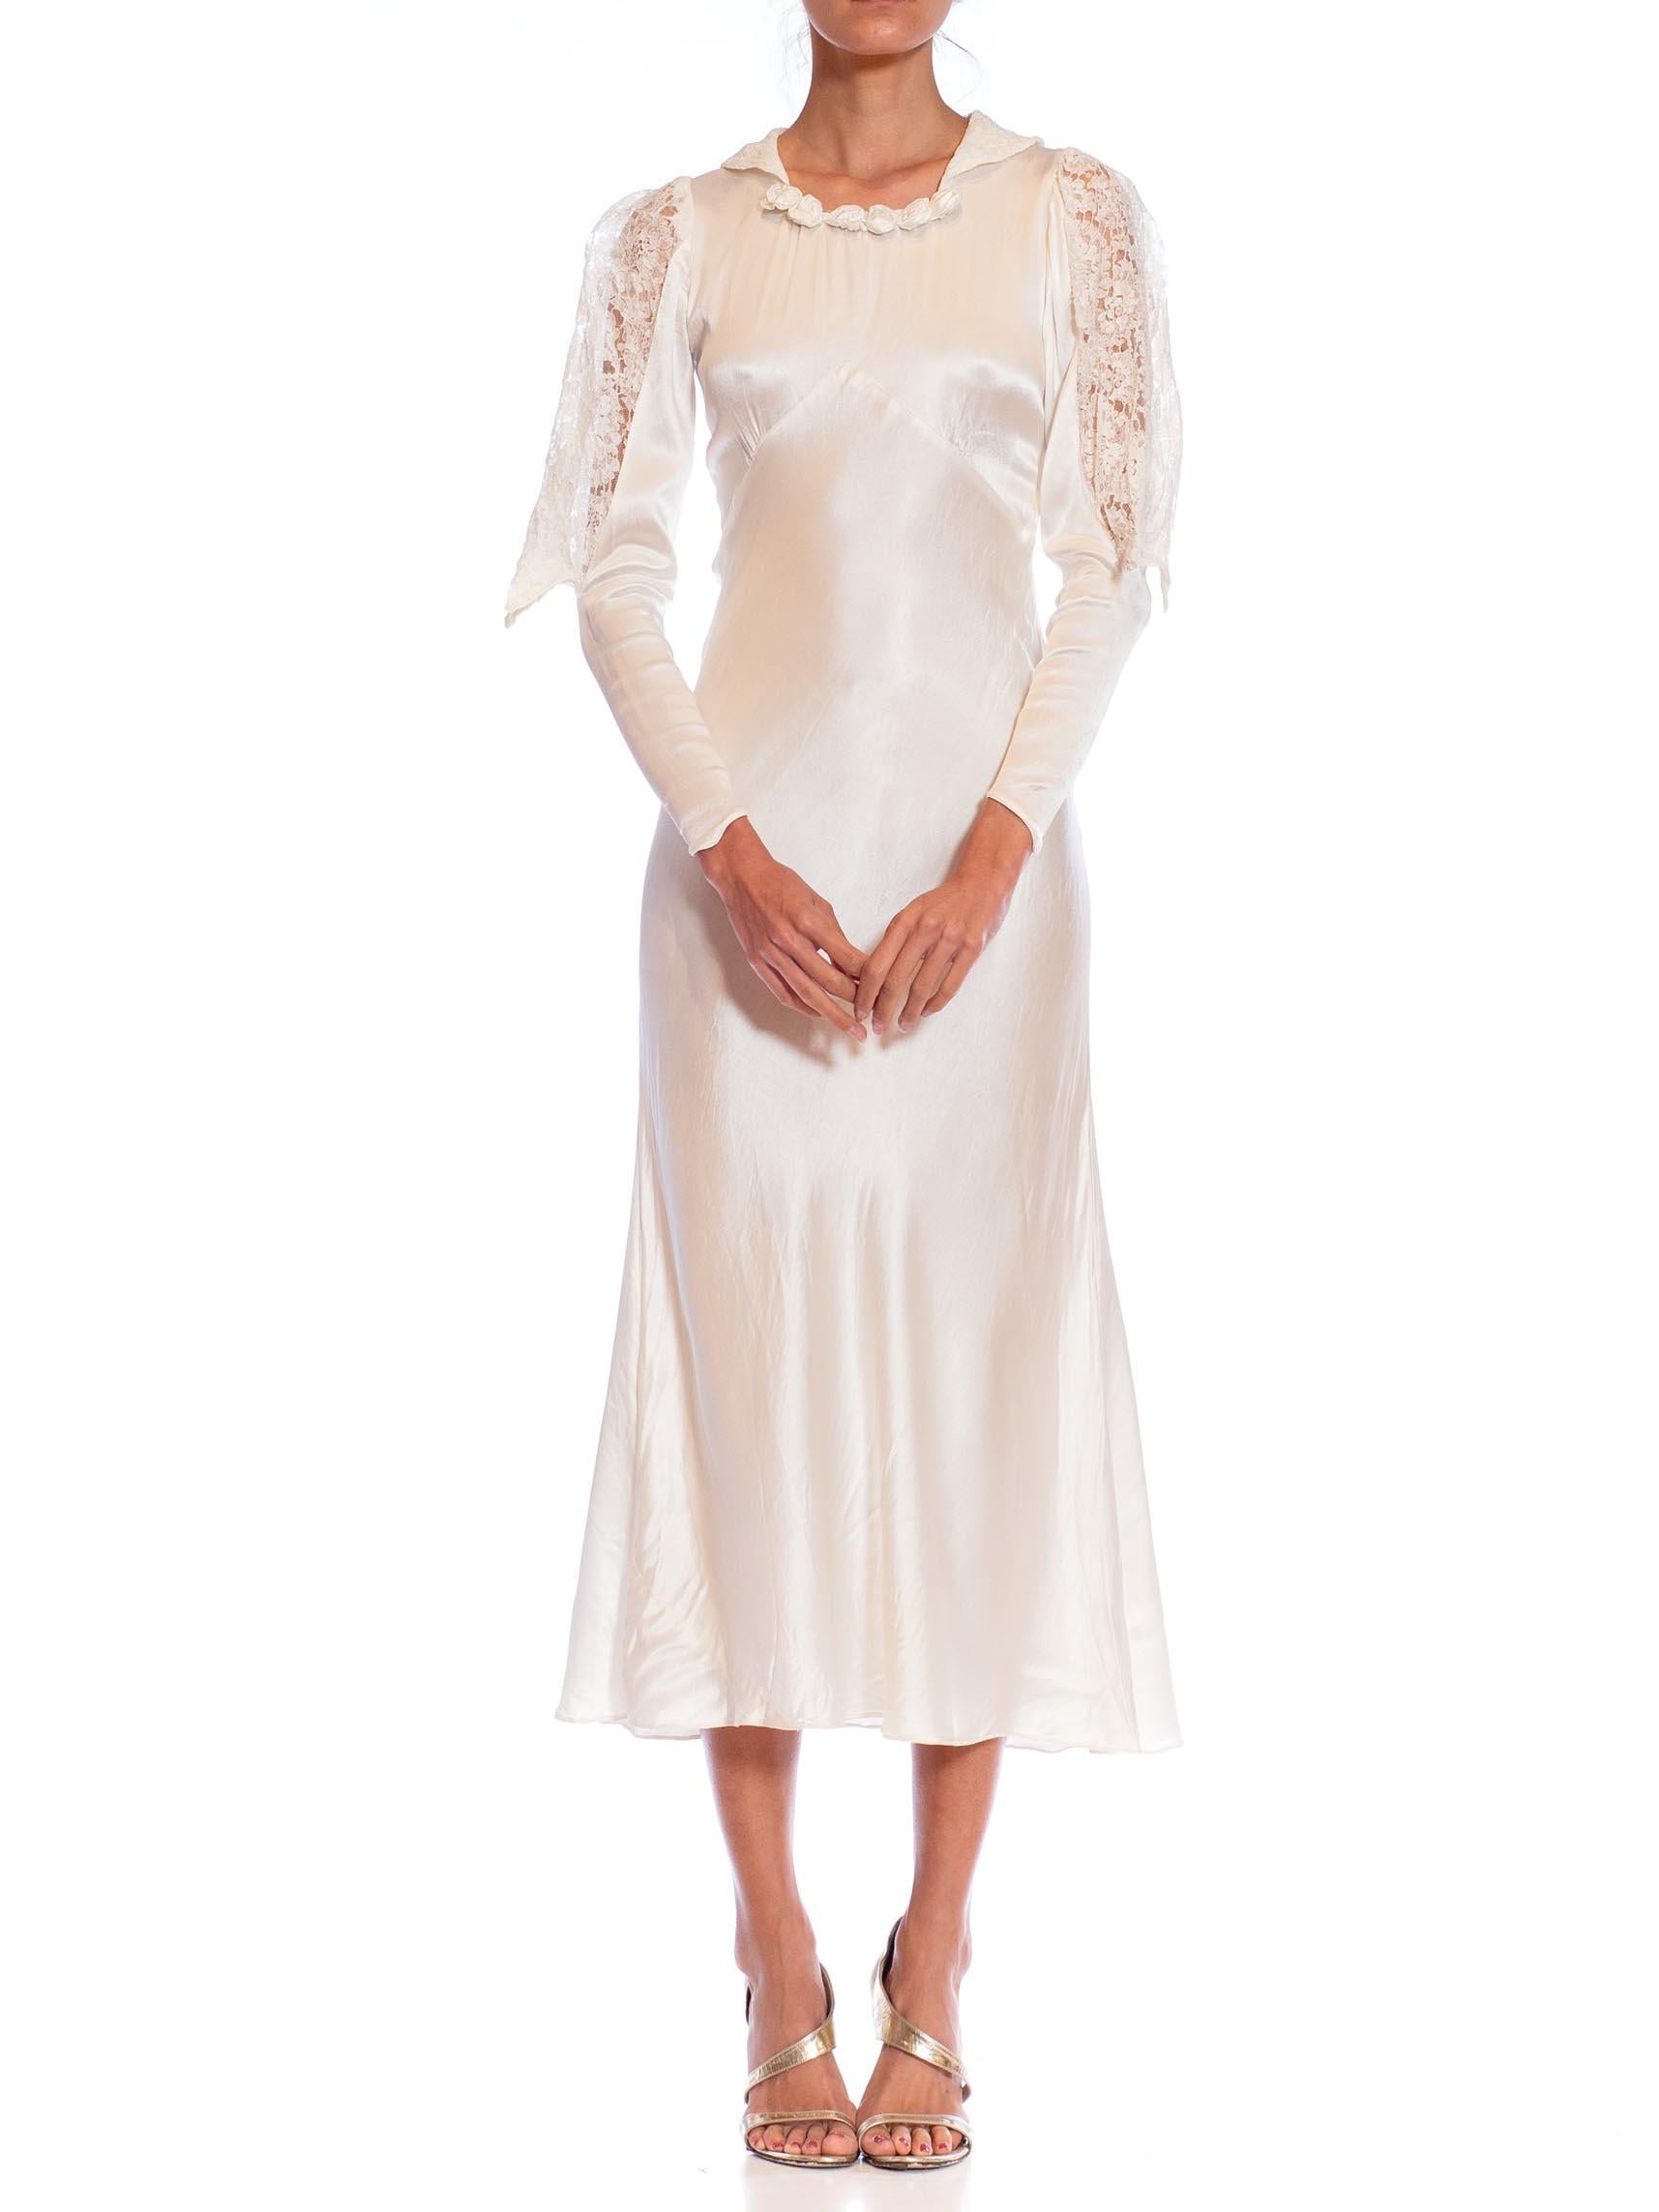 Women's 1930S Cream Rayon Satin & Chantilly Lace Unique Sleeve Dress For Sale